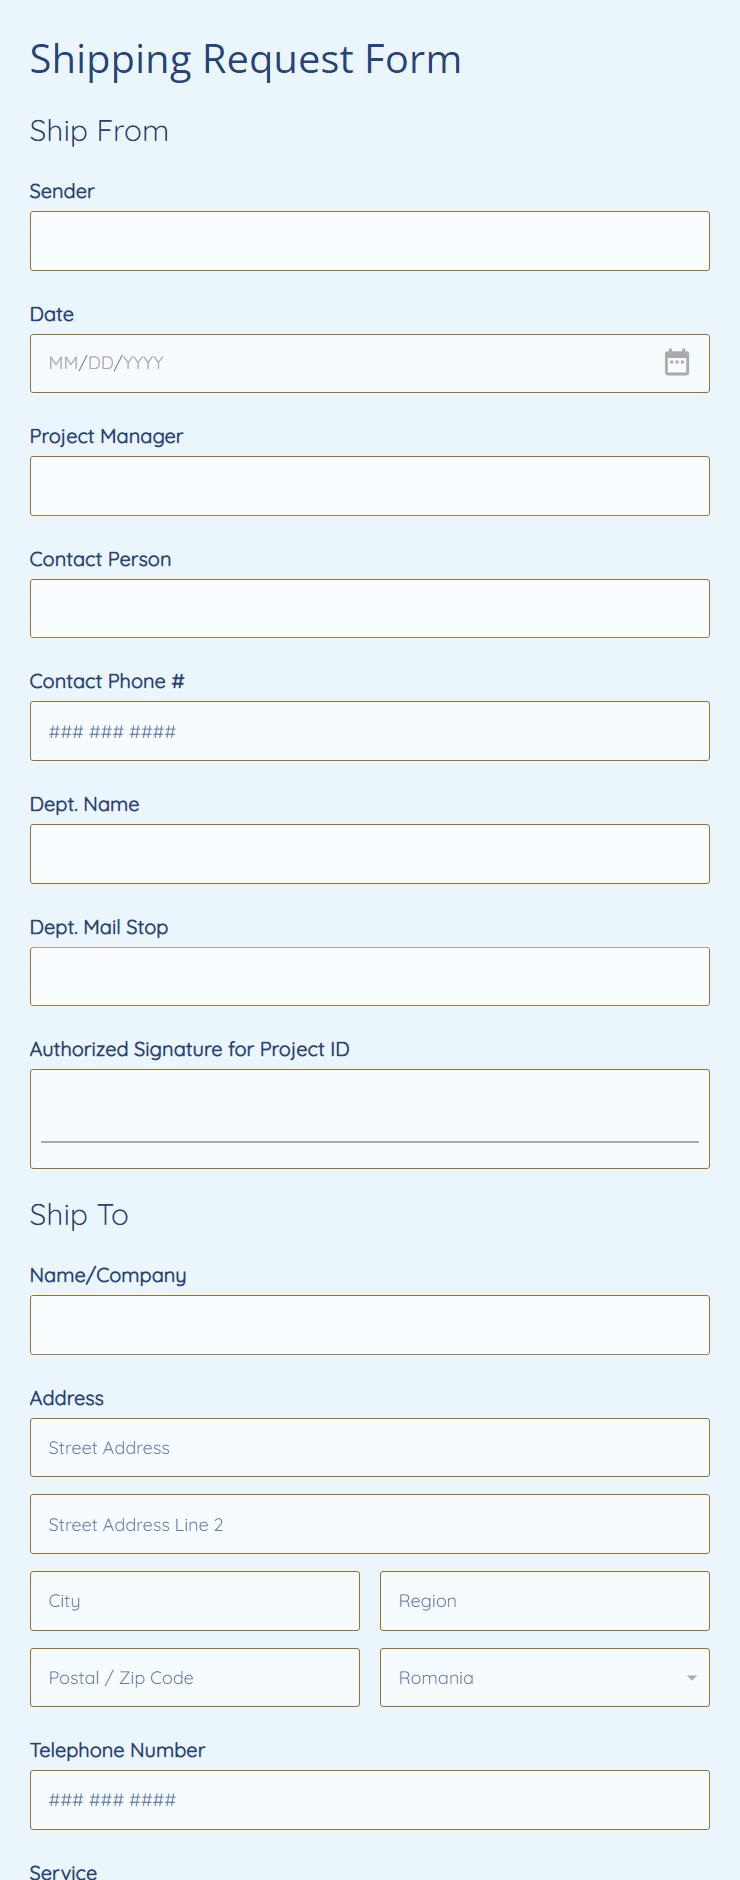 shipping-request-form-template-online-123formbuilder